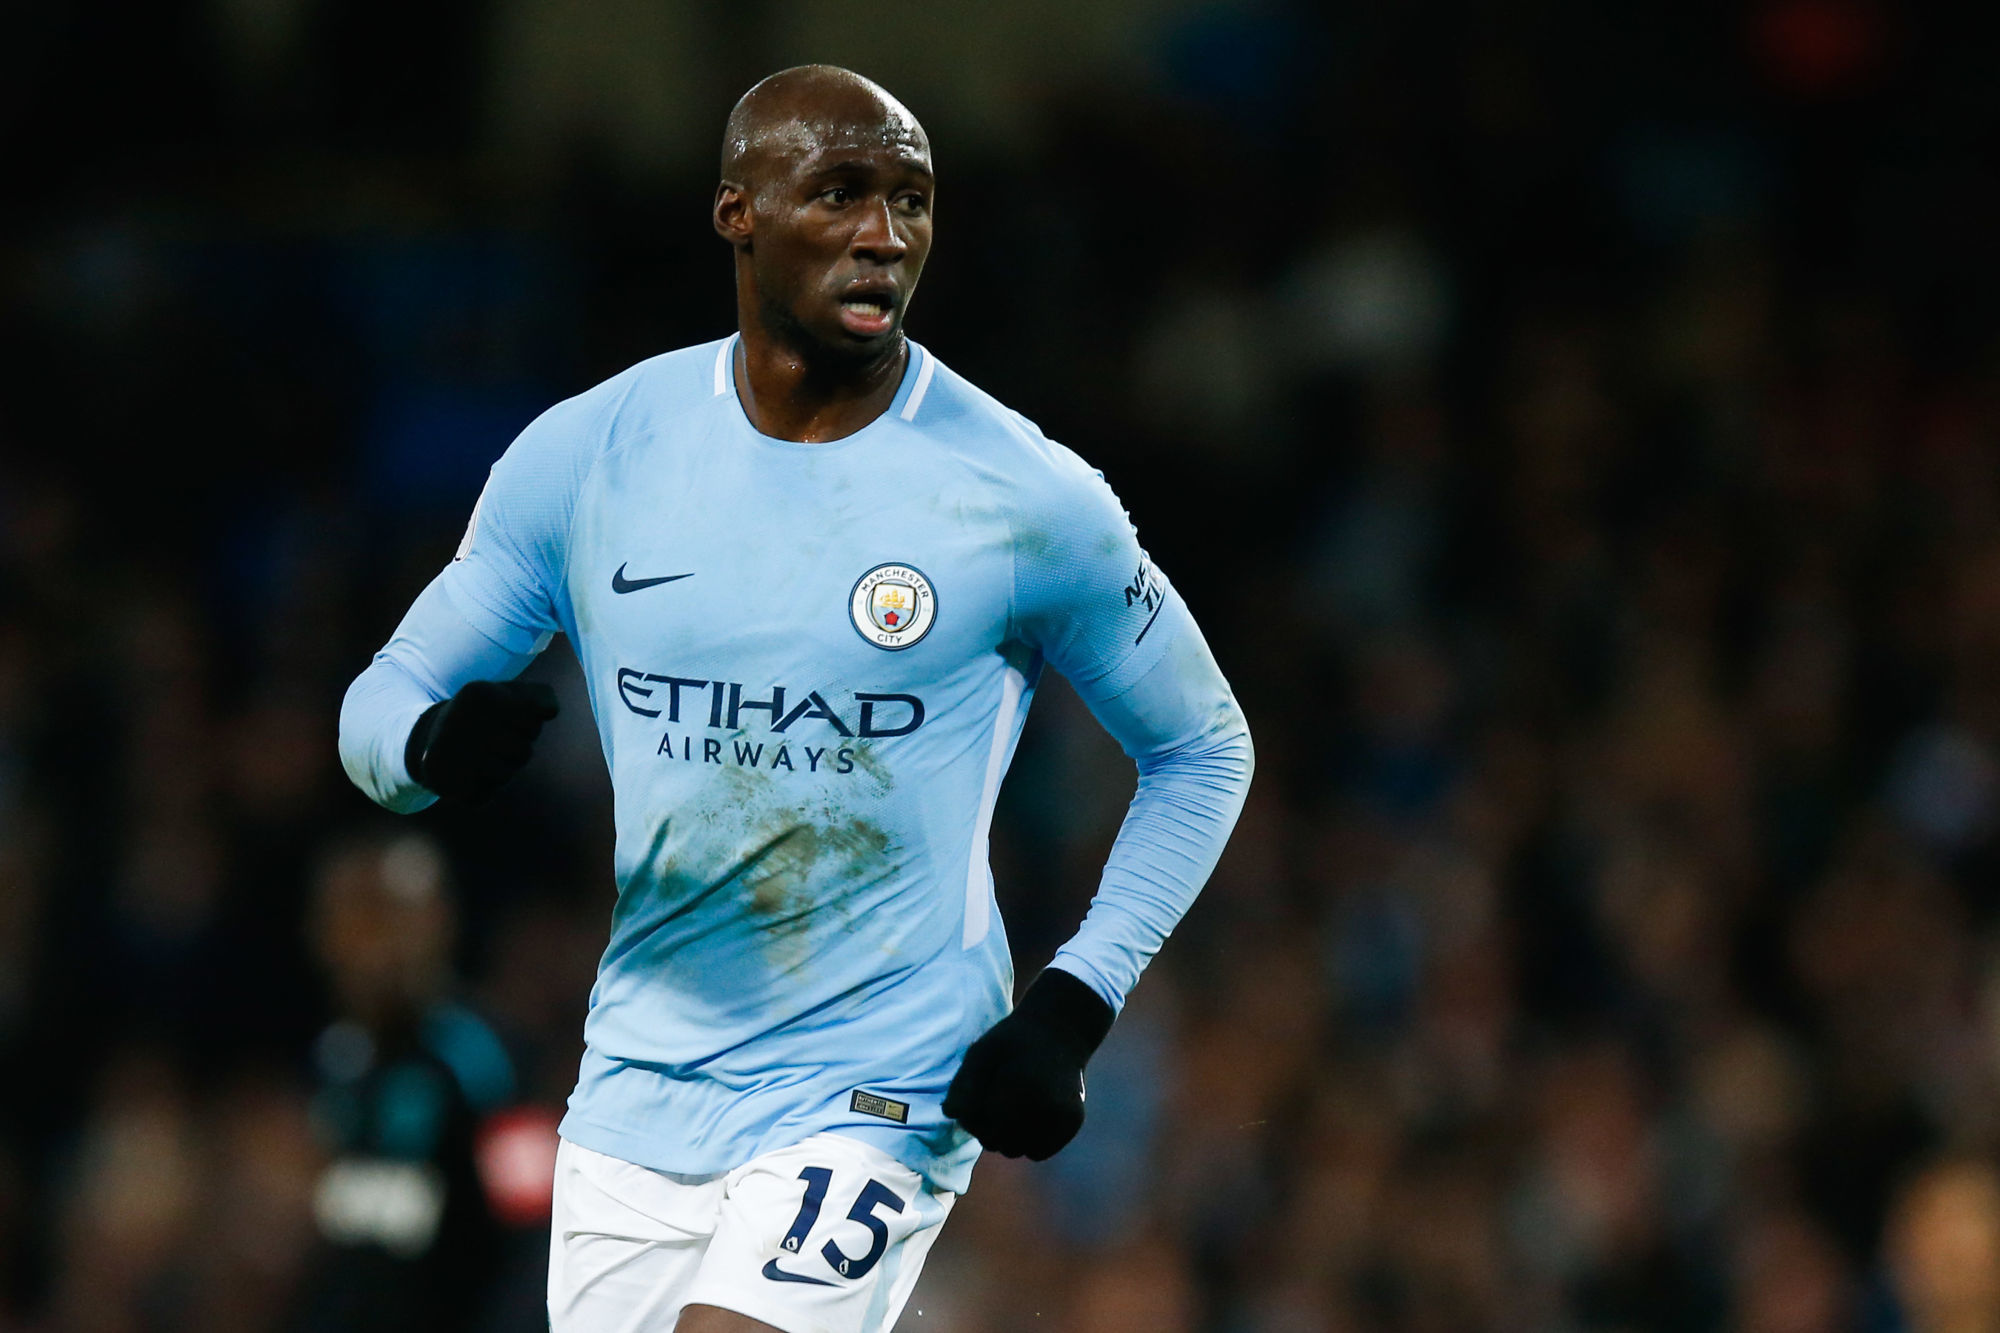 Eliaquim Mangala of Manchester City during the premier league match at the Etihad Stadium, Manchester. Picture date 3rd December 2017. Photo : Spi / Icon Sport